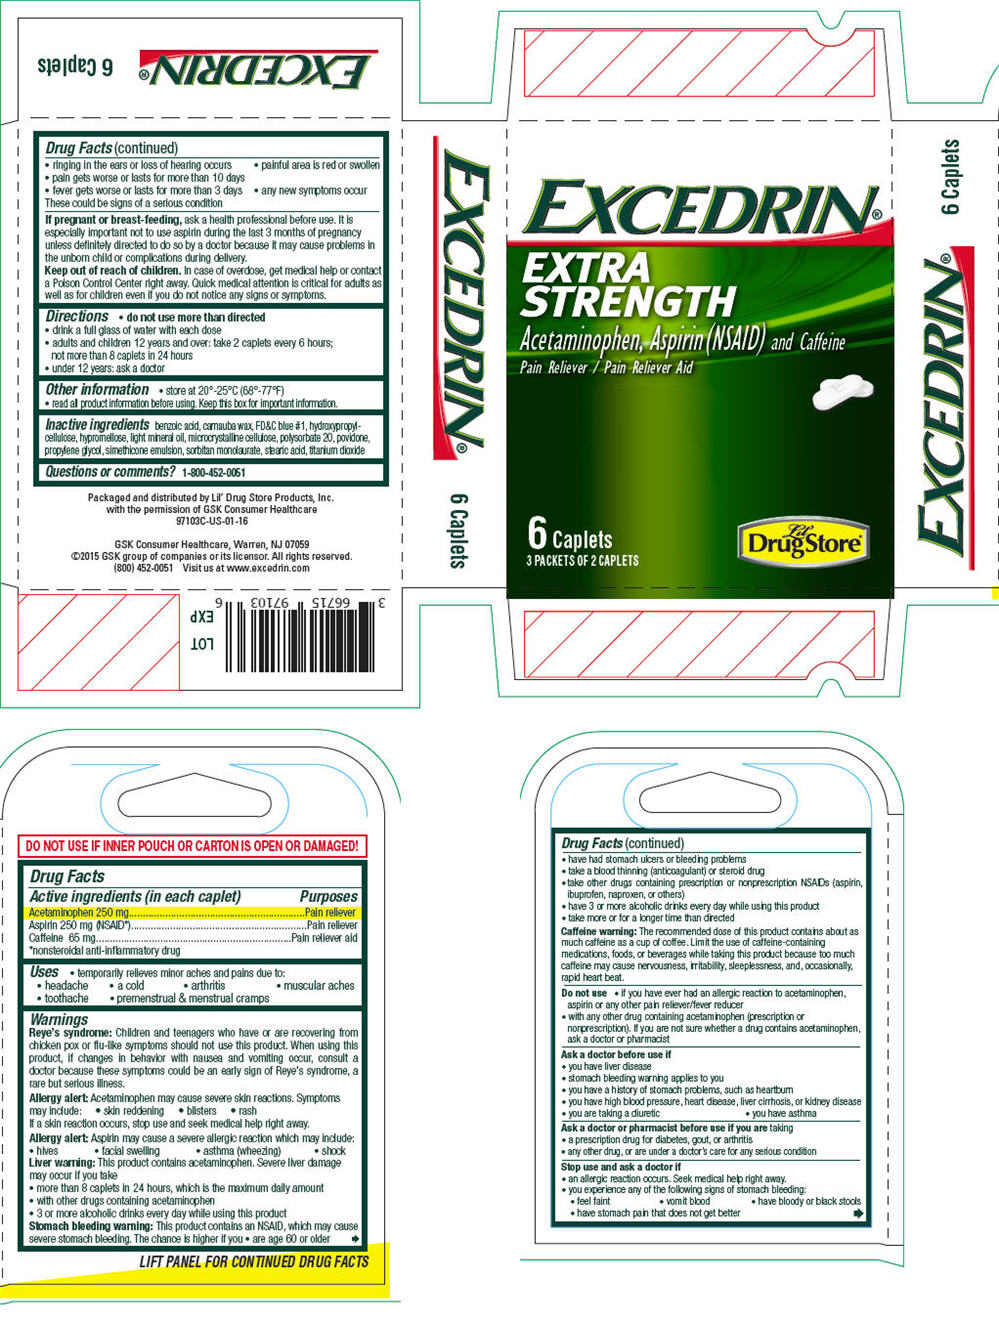 Excedrin Ingredients and Dosage Information